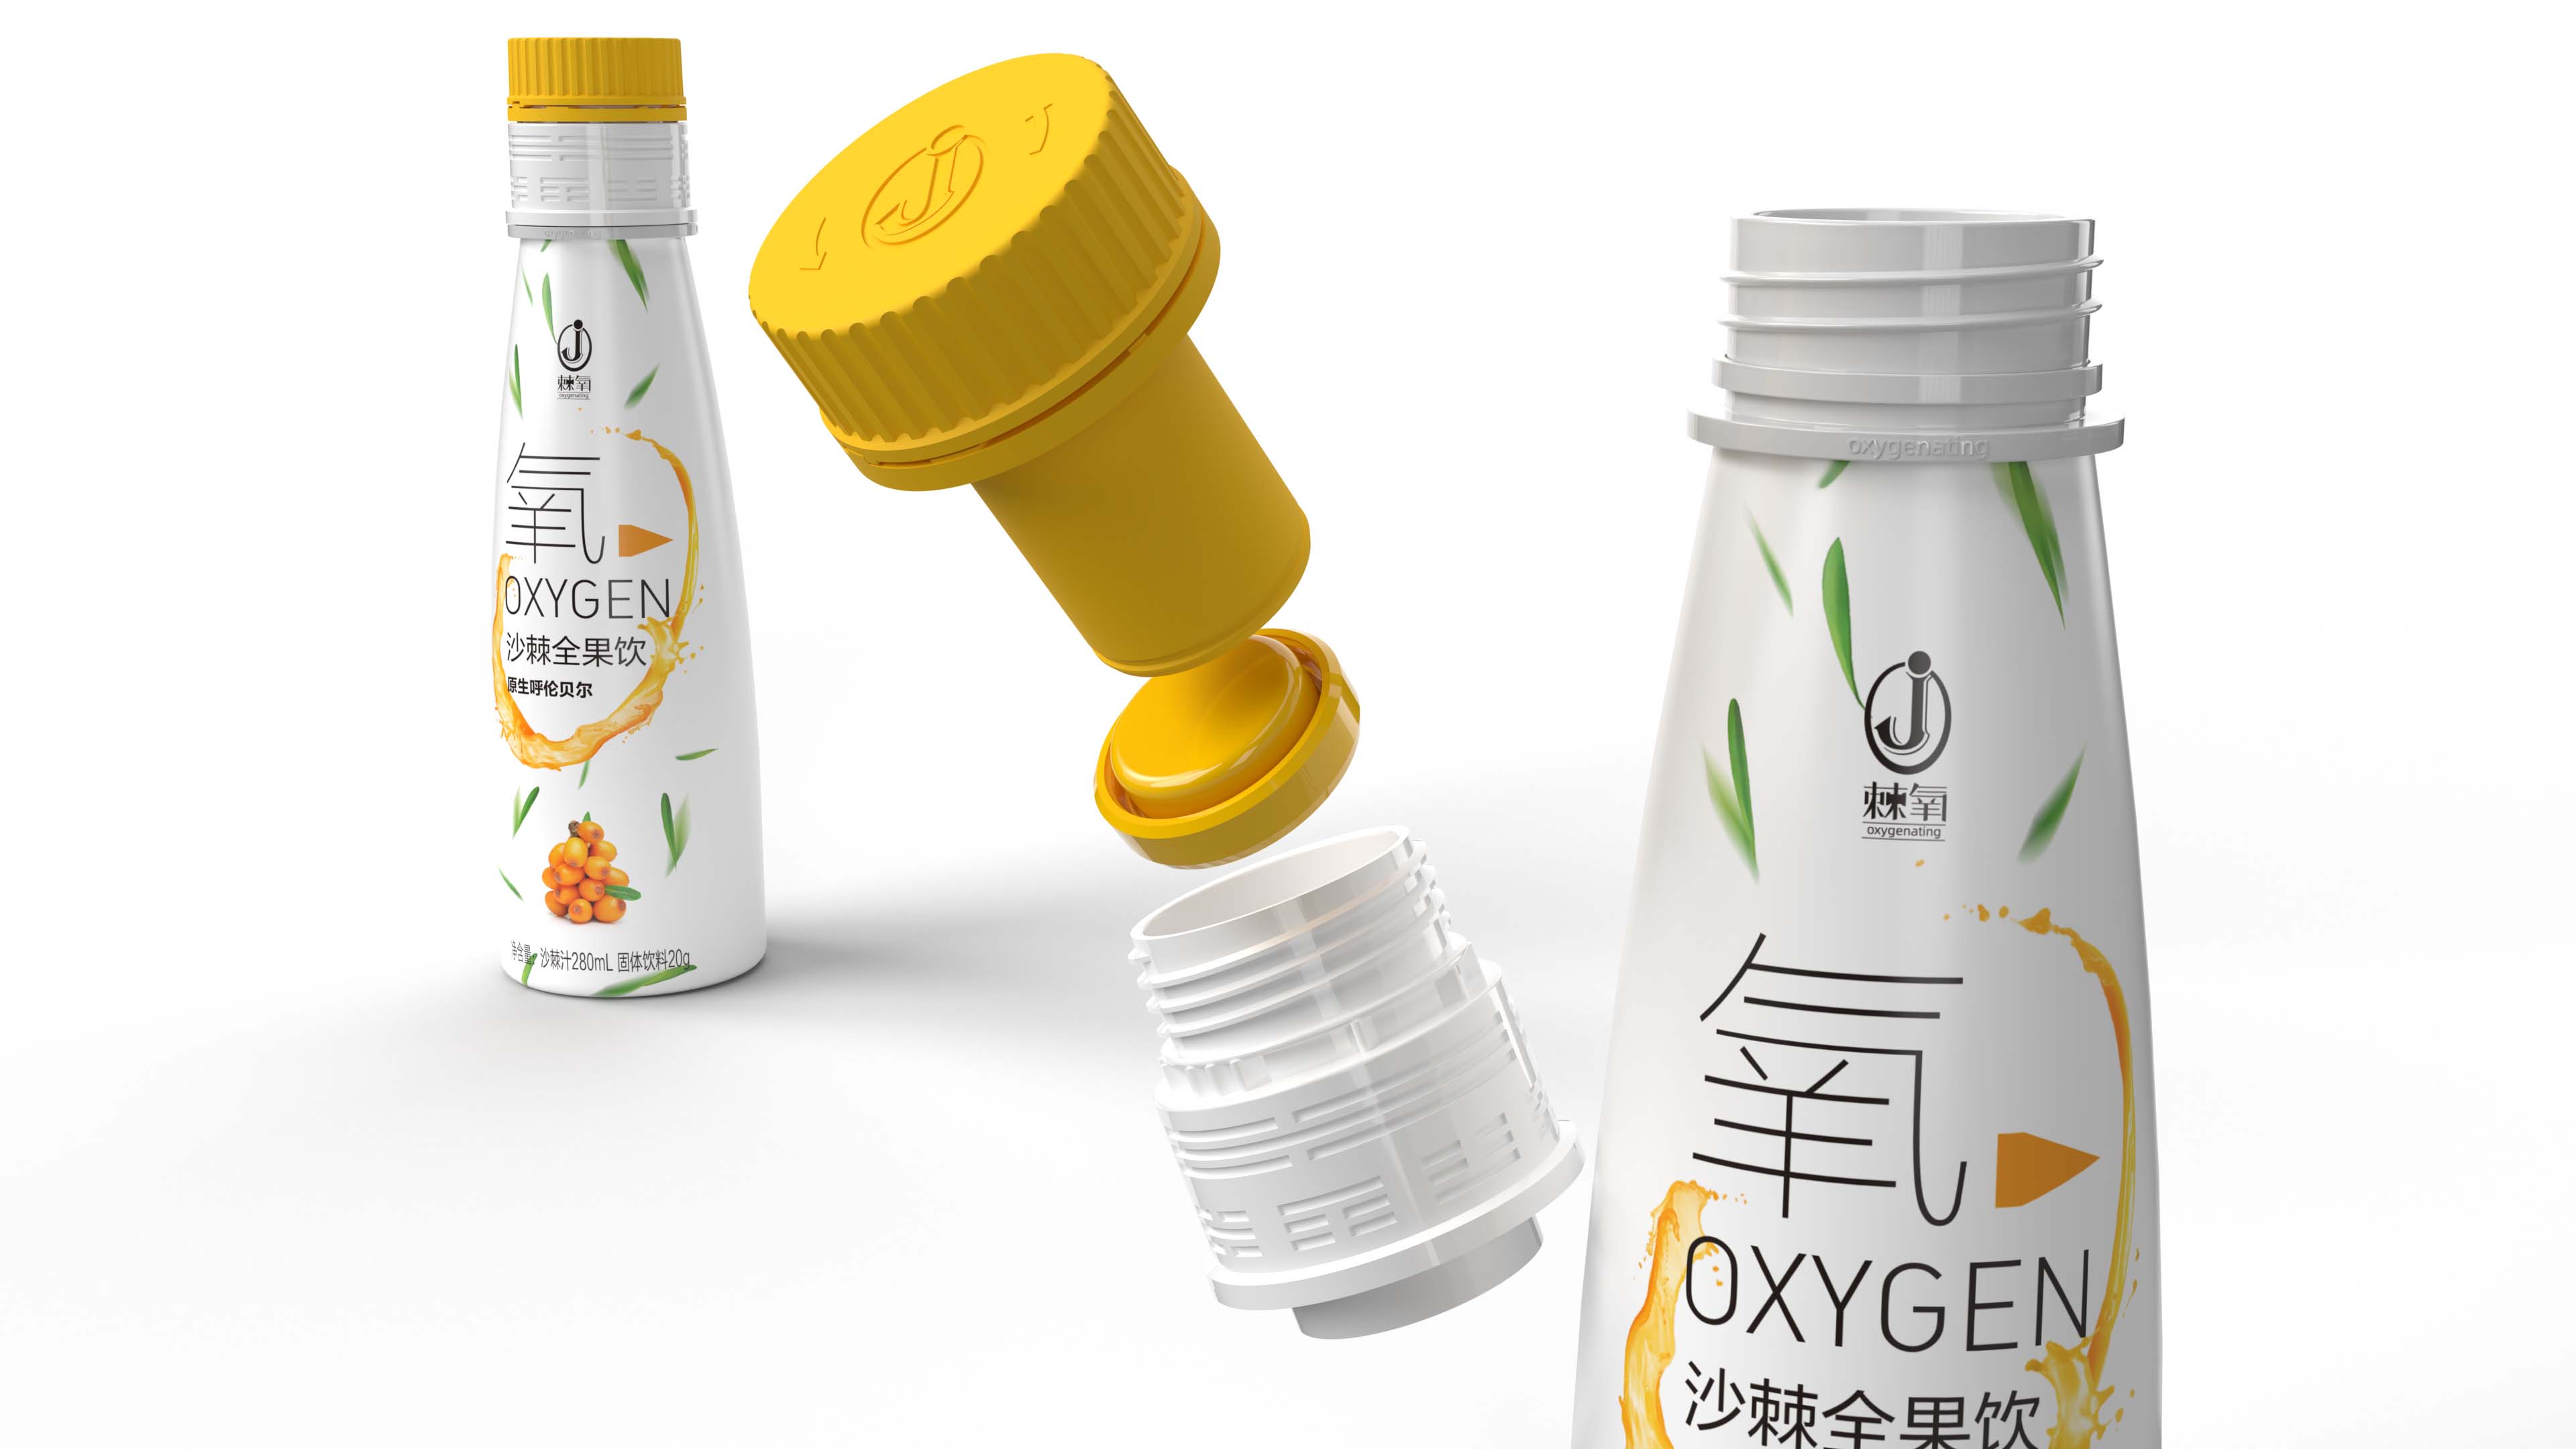 Oxygenating Structural Packaging Design Concept by Spud Studio